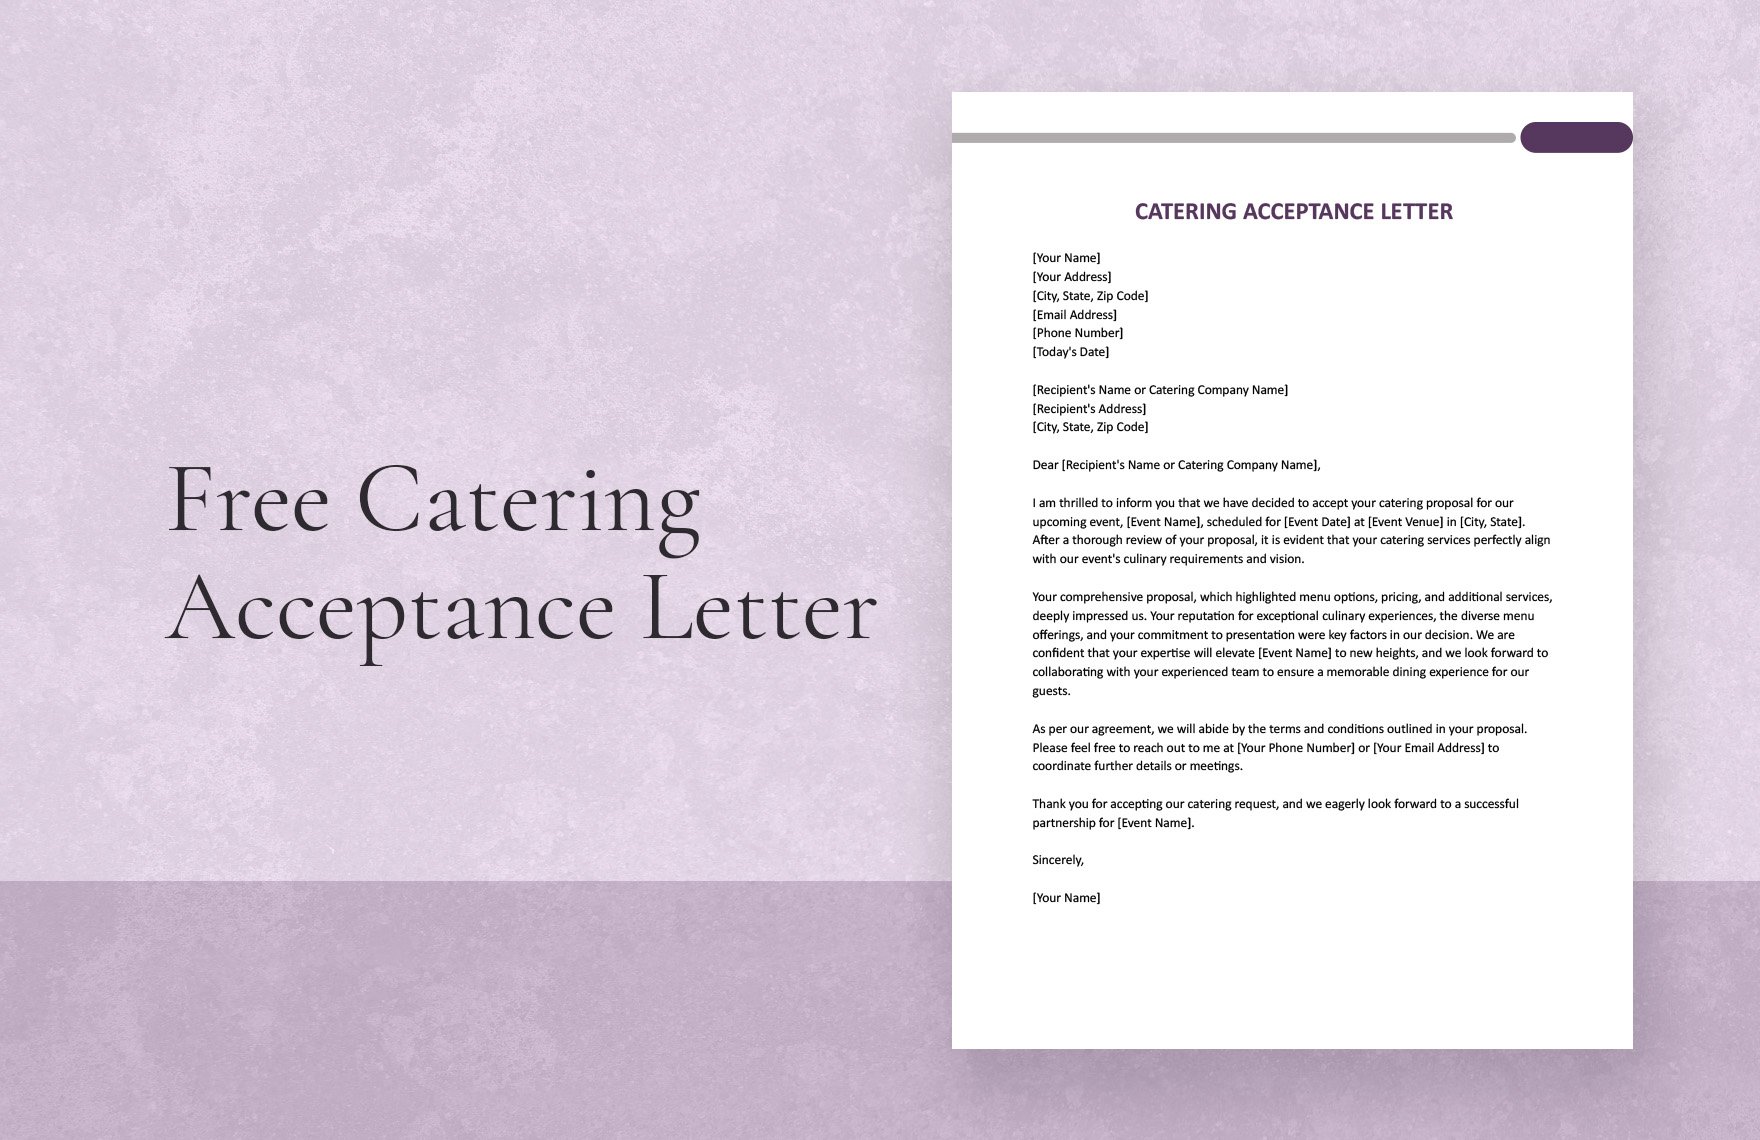 Free Catering Acceptance Letter